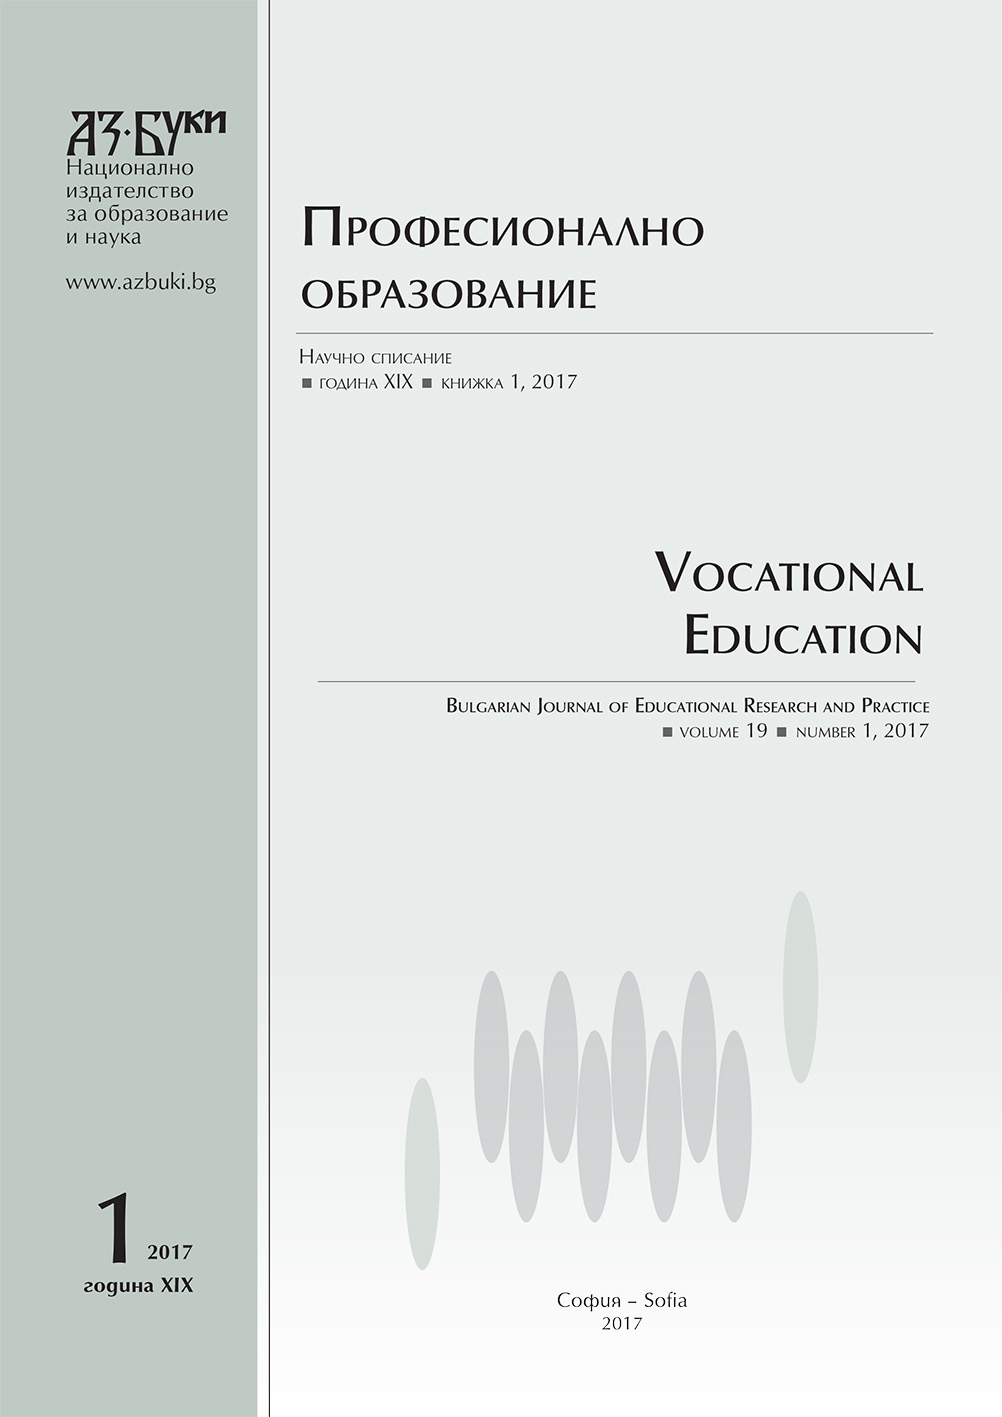 Vocational Education in Pazardzhik Region – Traditions, Achievements, Challenges Cover Image